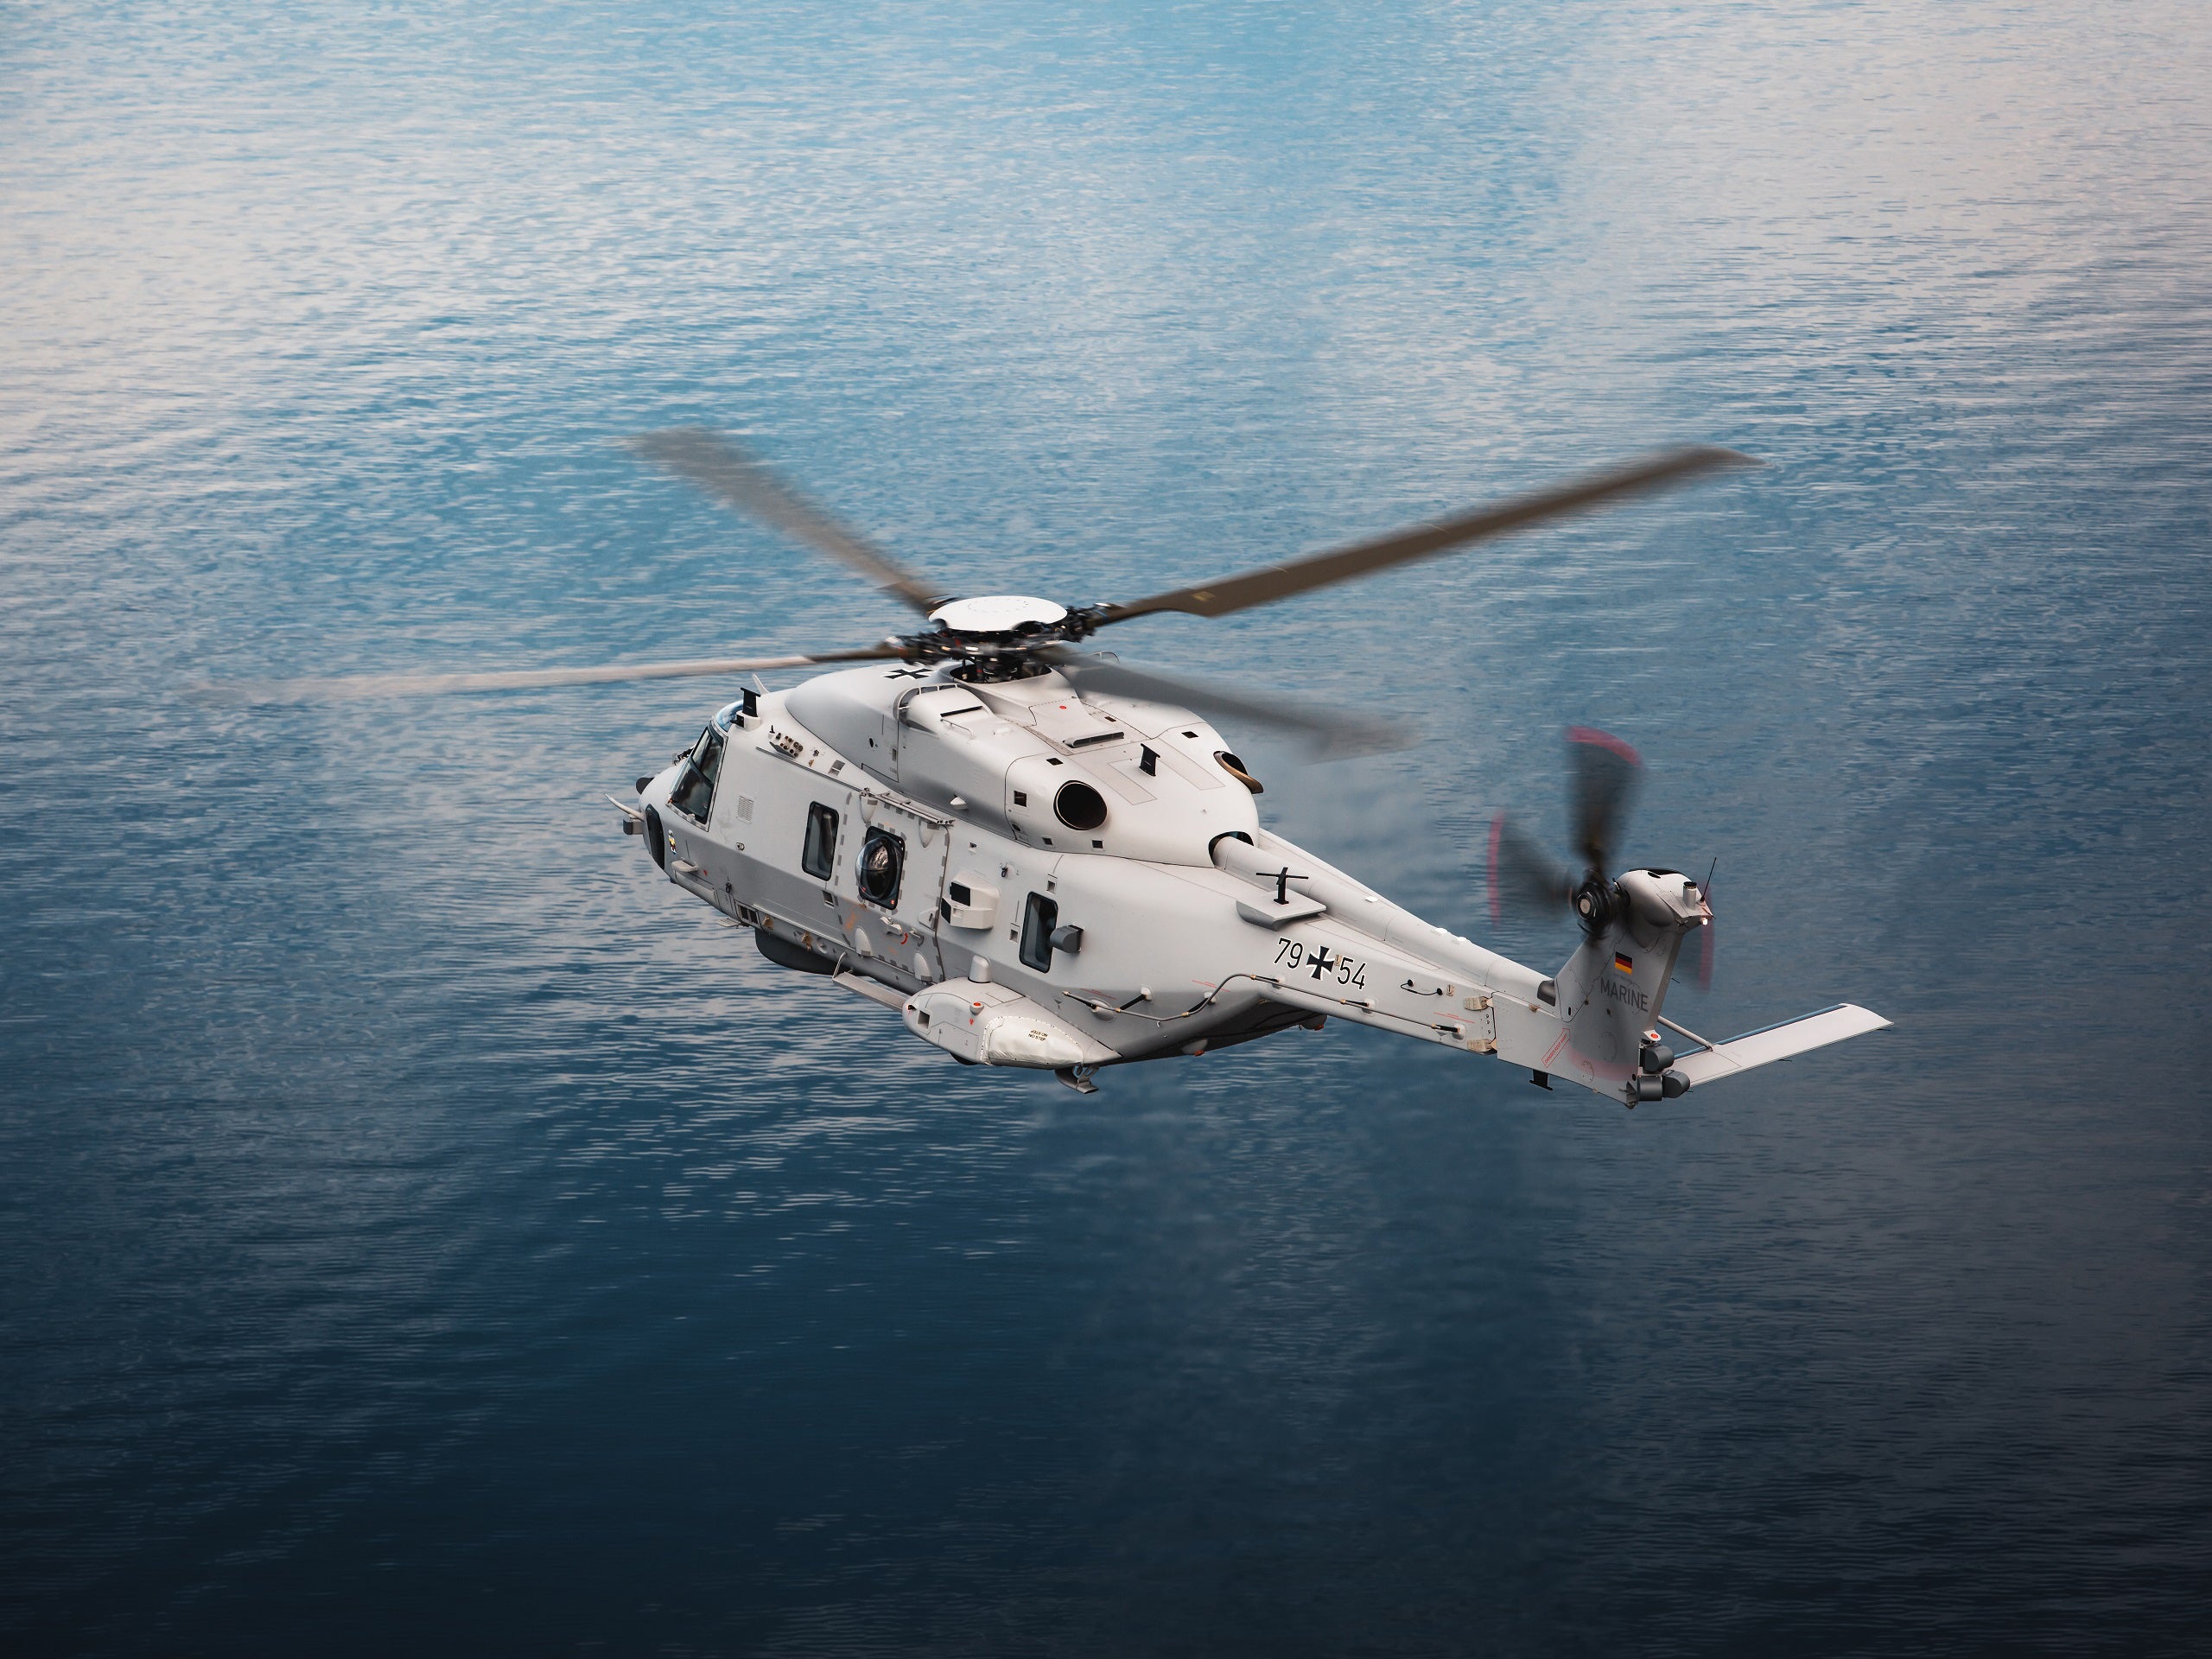 Anti-surface warfare helicopters are here to stay